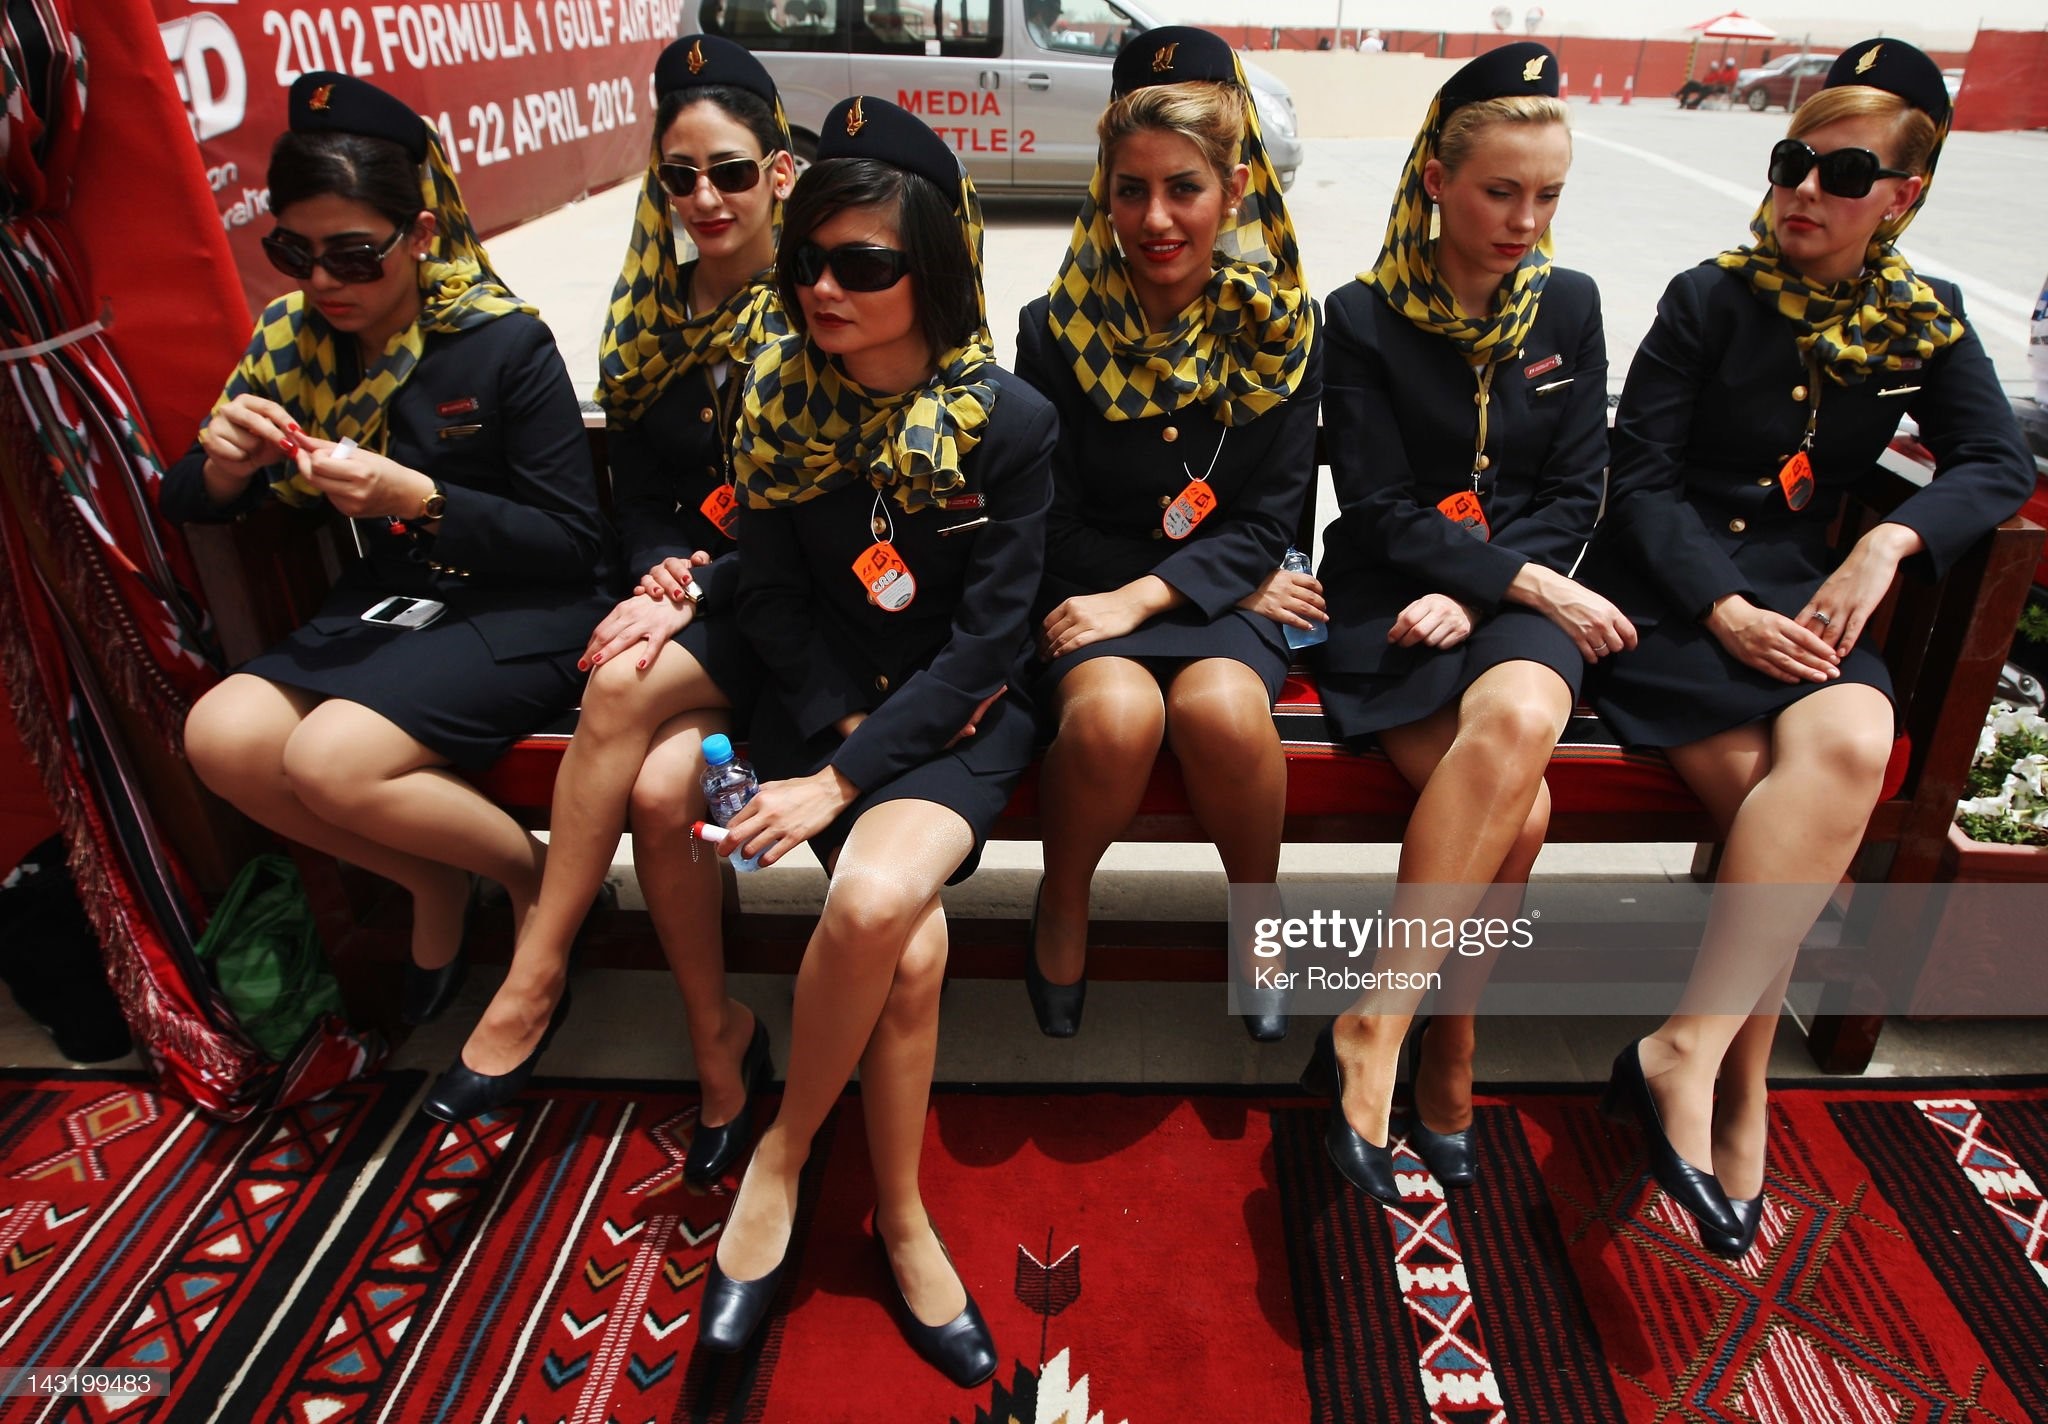 Grid girls are seen before qualifying for the Bahrain Formula One Grand Prix at the Bahrain International Circuit on April 21, 2012 in Sakhir, Bahrain. 